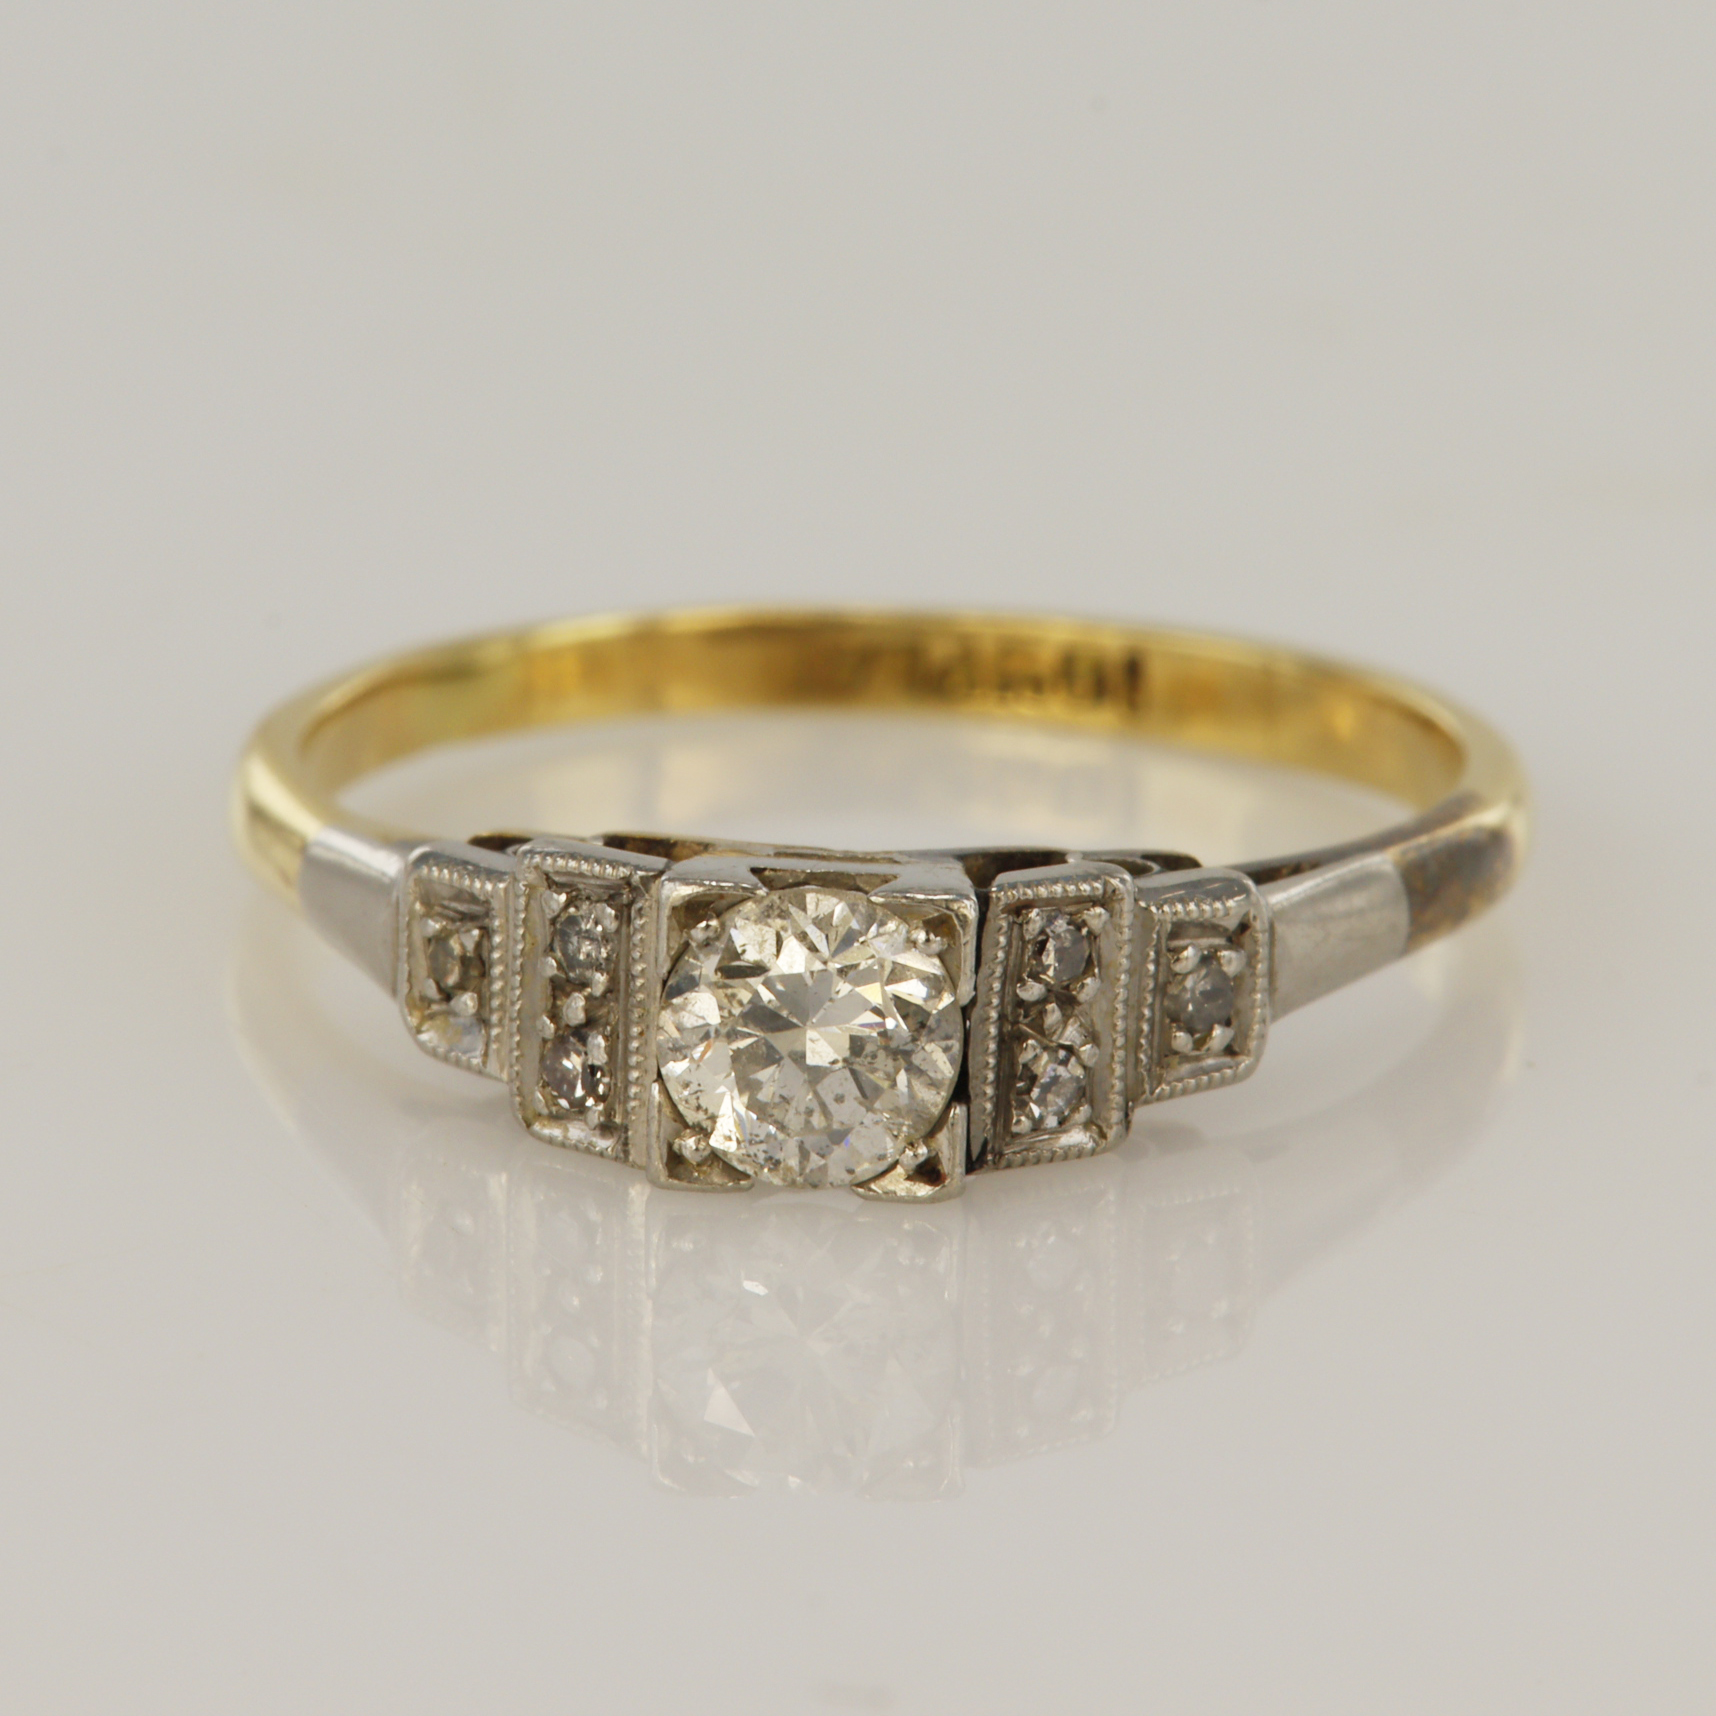 Yellow gold (tests 18ct) vintage diamond dress ring, one round brilliant cut approx. 0.27ct, flanked